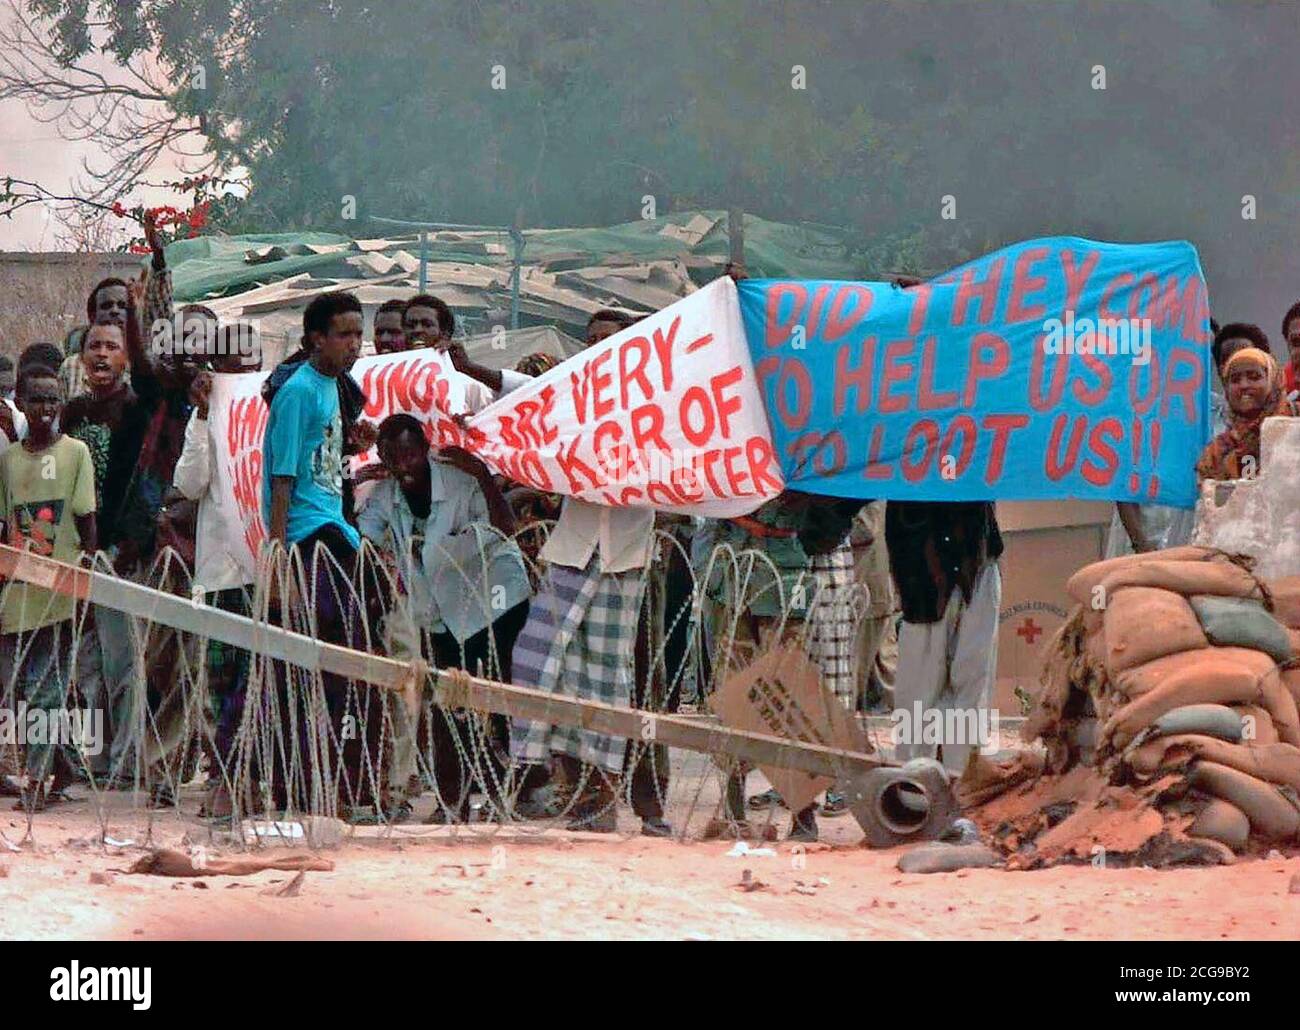 1993 - Somali people hold up a banner in protest at gate eight of the US Embassy in Mogadishu.  They seem to be protesting the existence of coalition forces assigned to Operation Restore Hope. Stock Photo